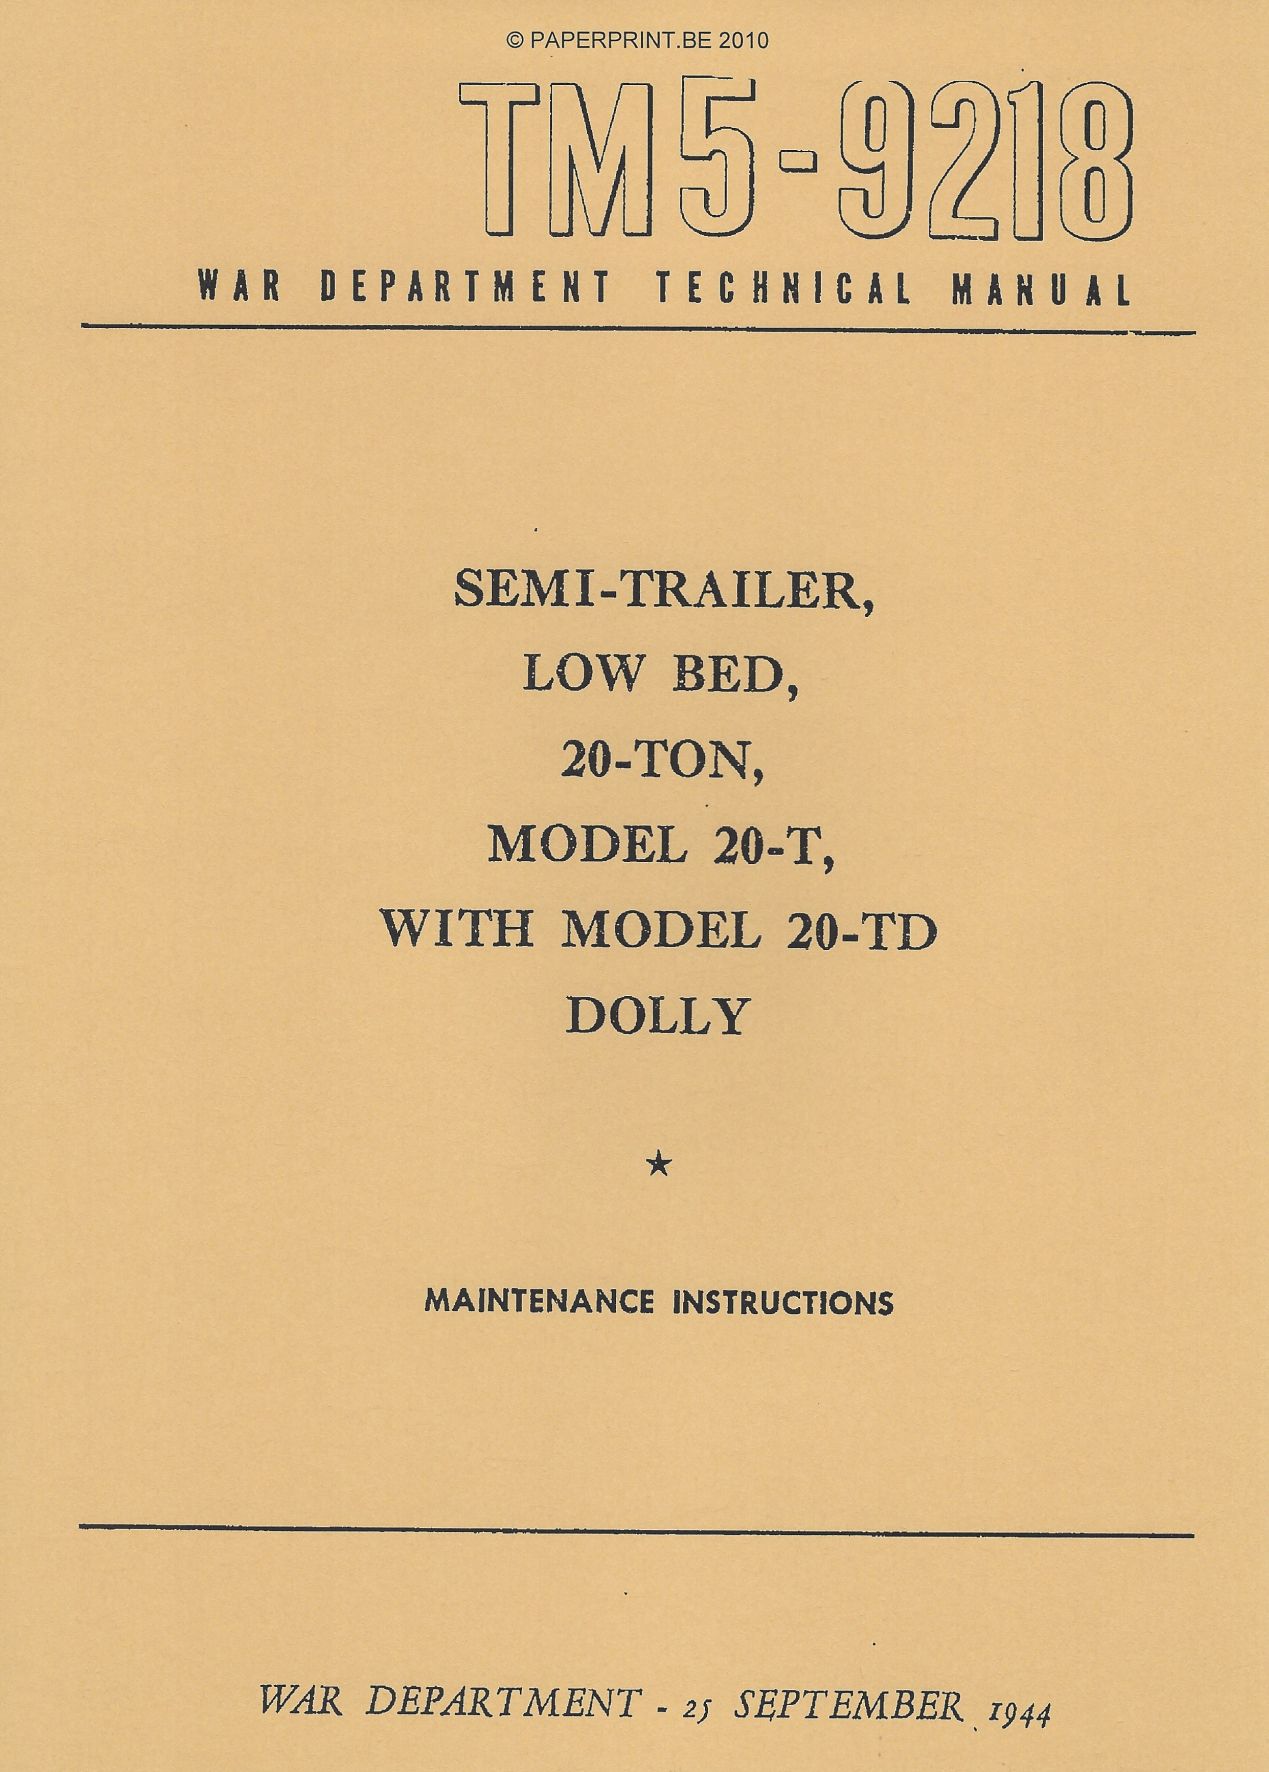 TM 5-9218 US SEMI-TRAILER, LOW BED, 20-TON, MODEL 20-T WITH MODEL 20-TD DOLLY